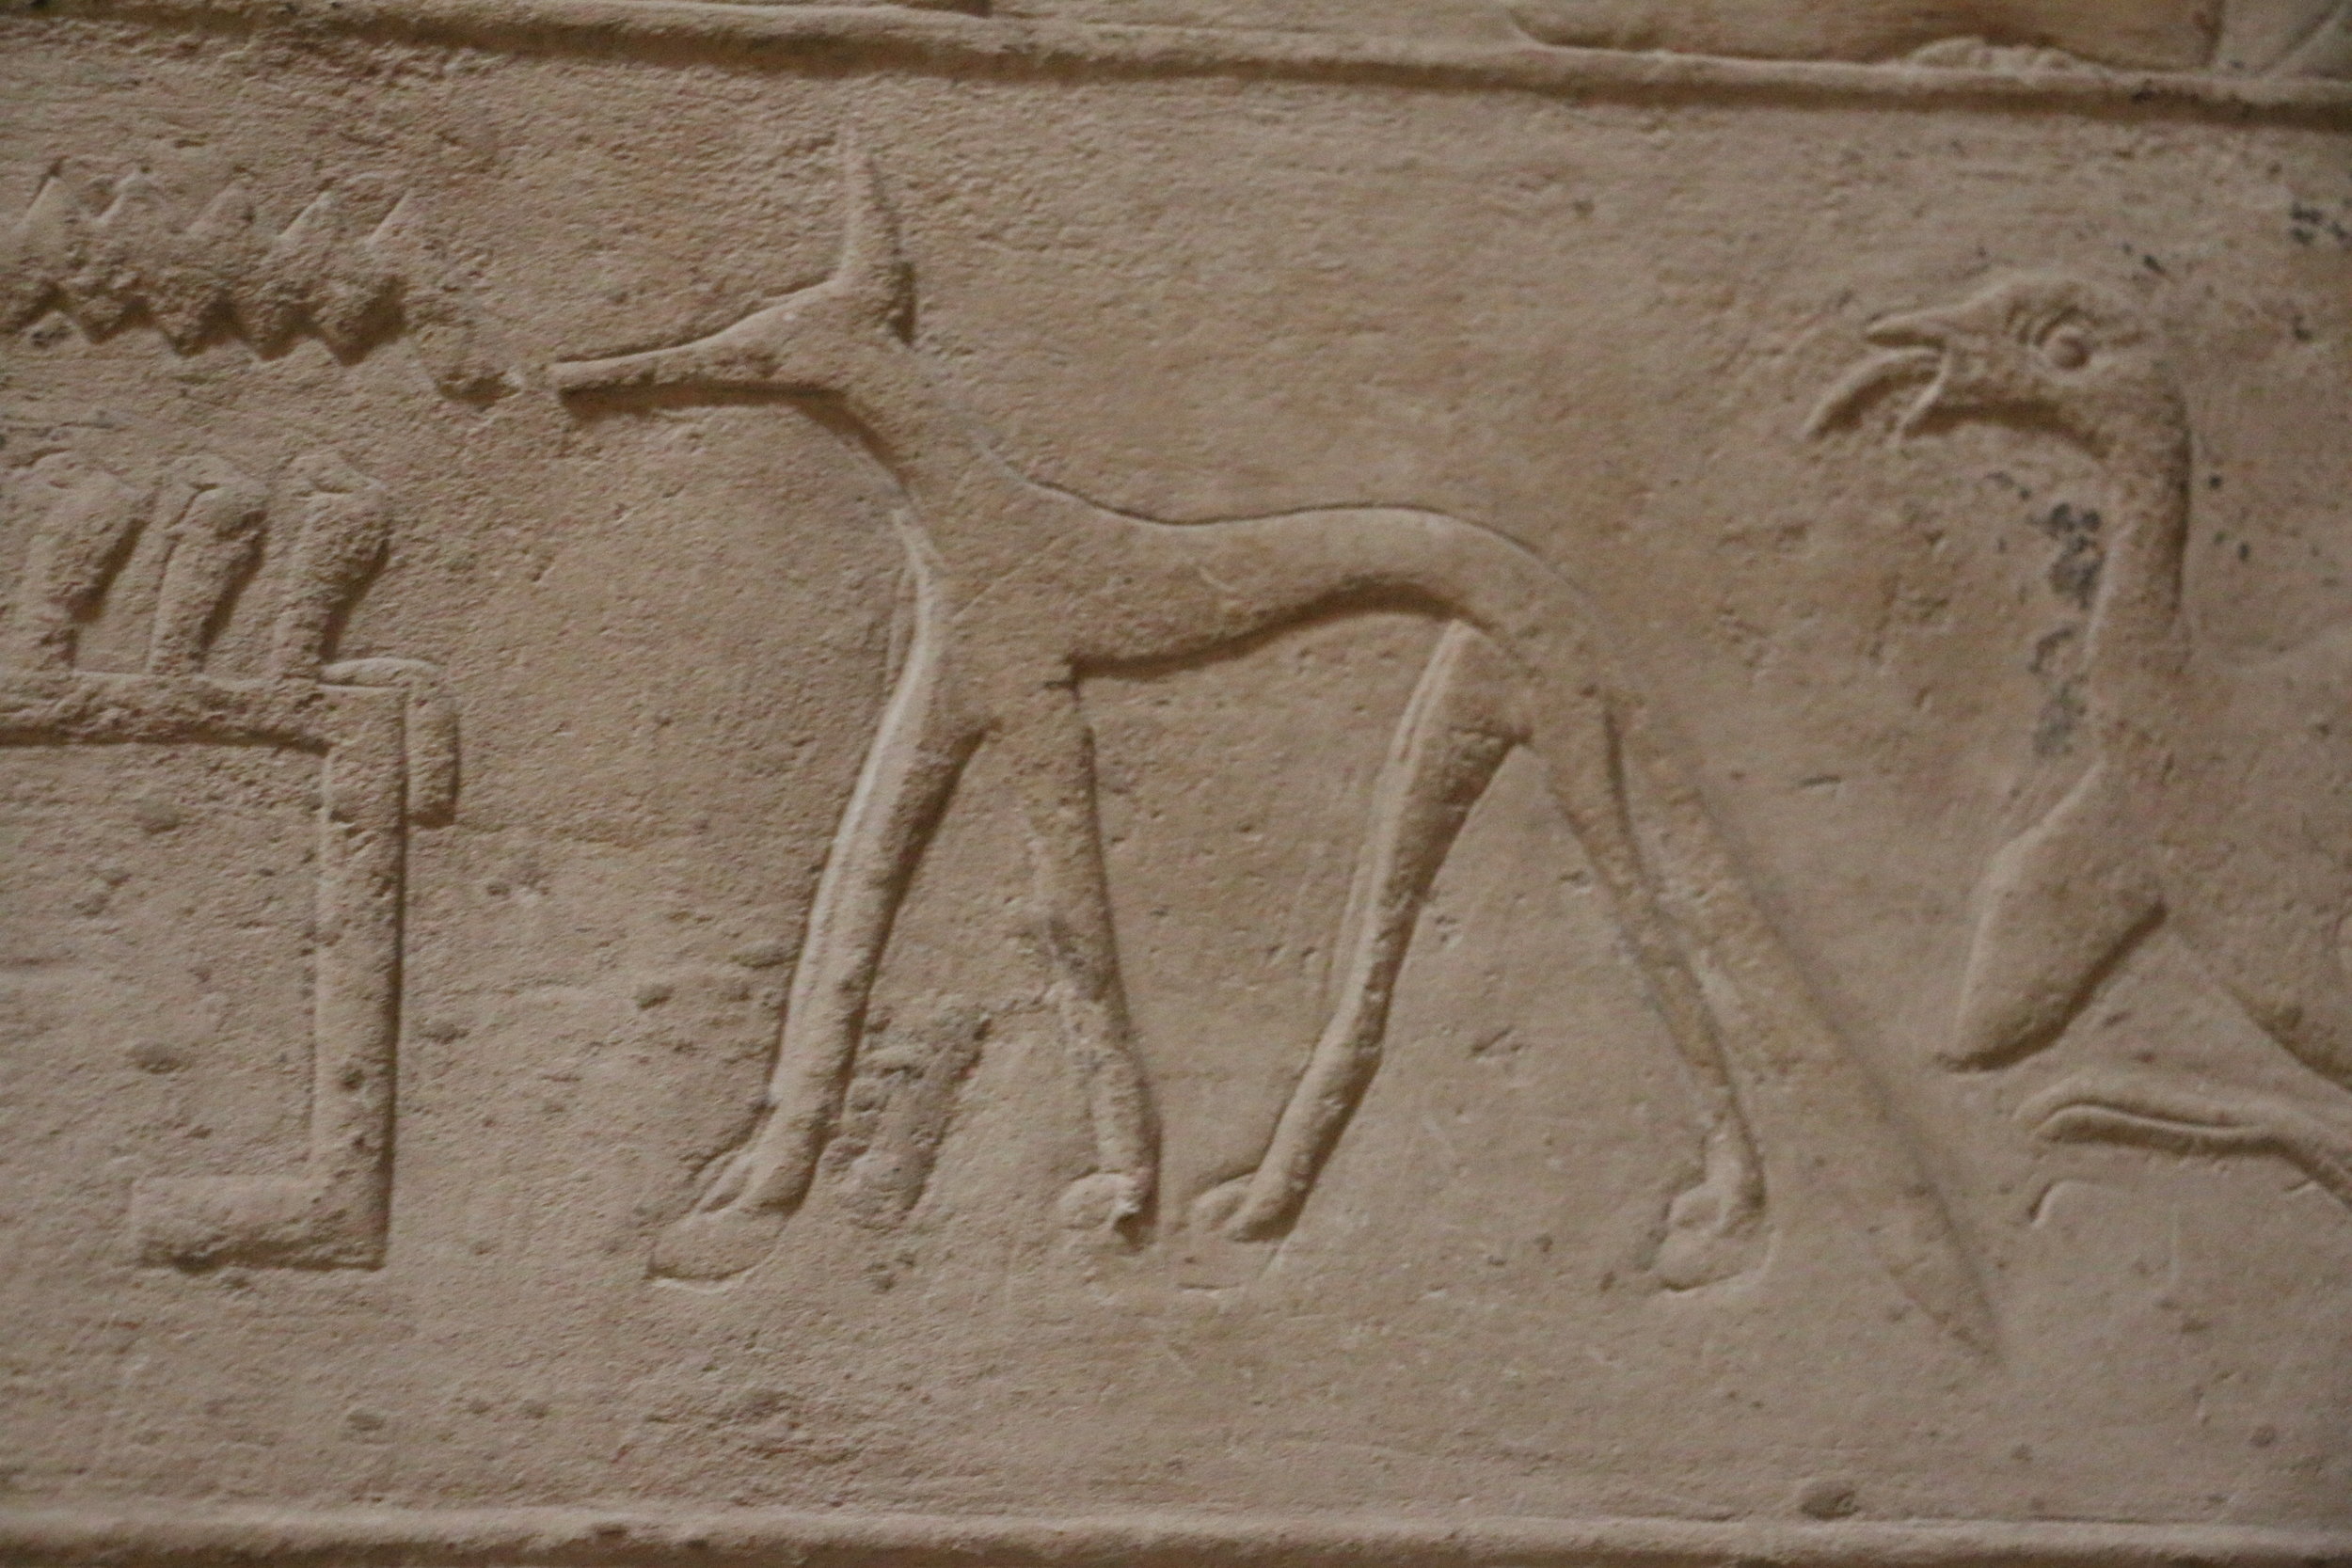 Saluki prominently depicted on the walls of the Funerary Complex at Djoser